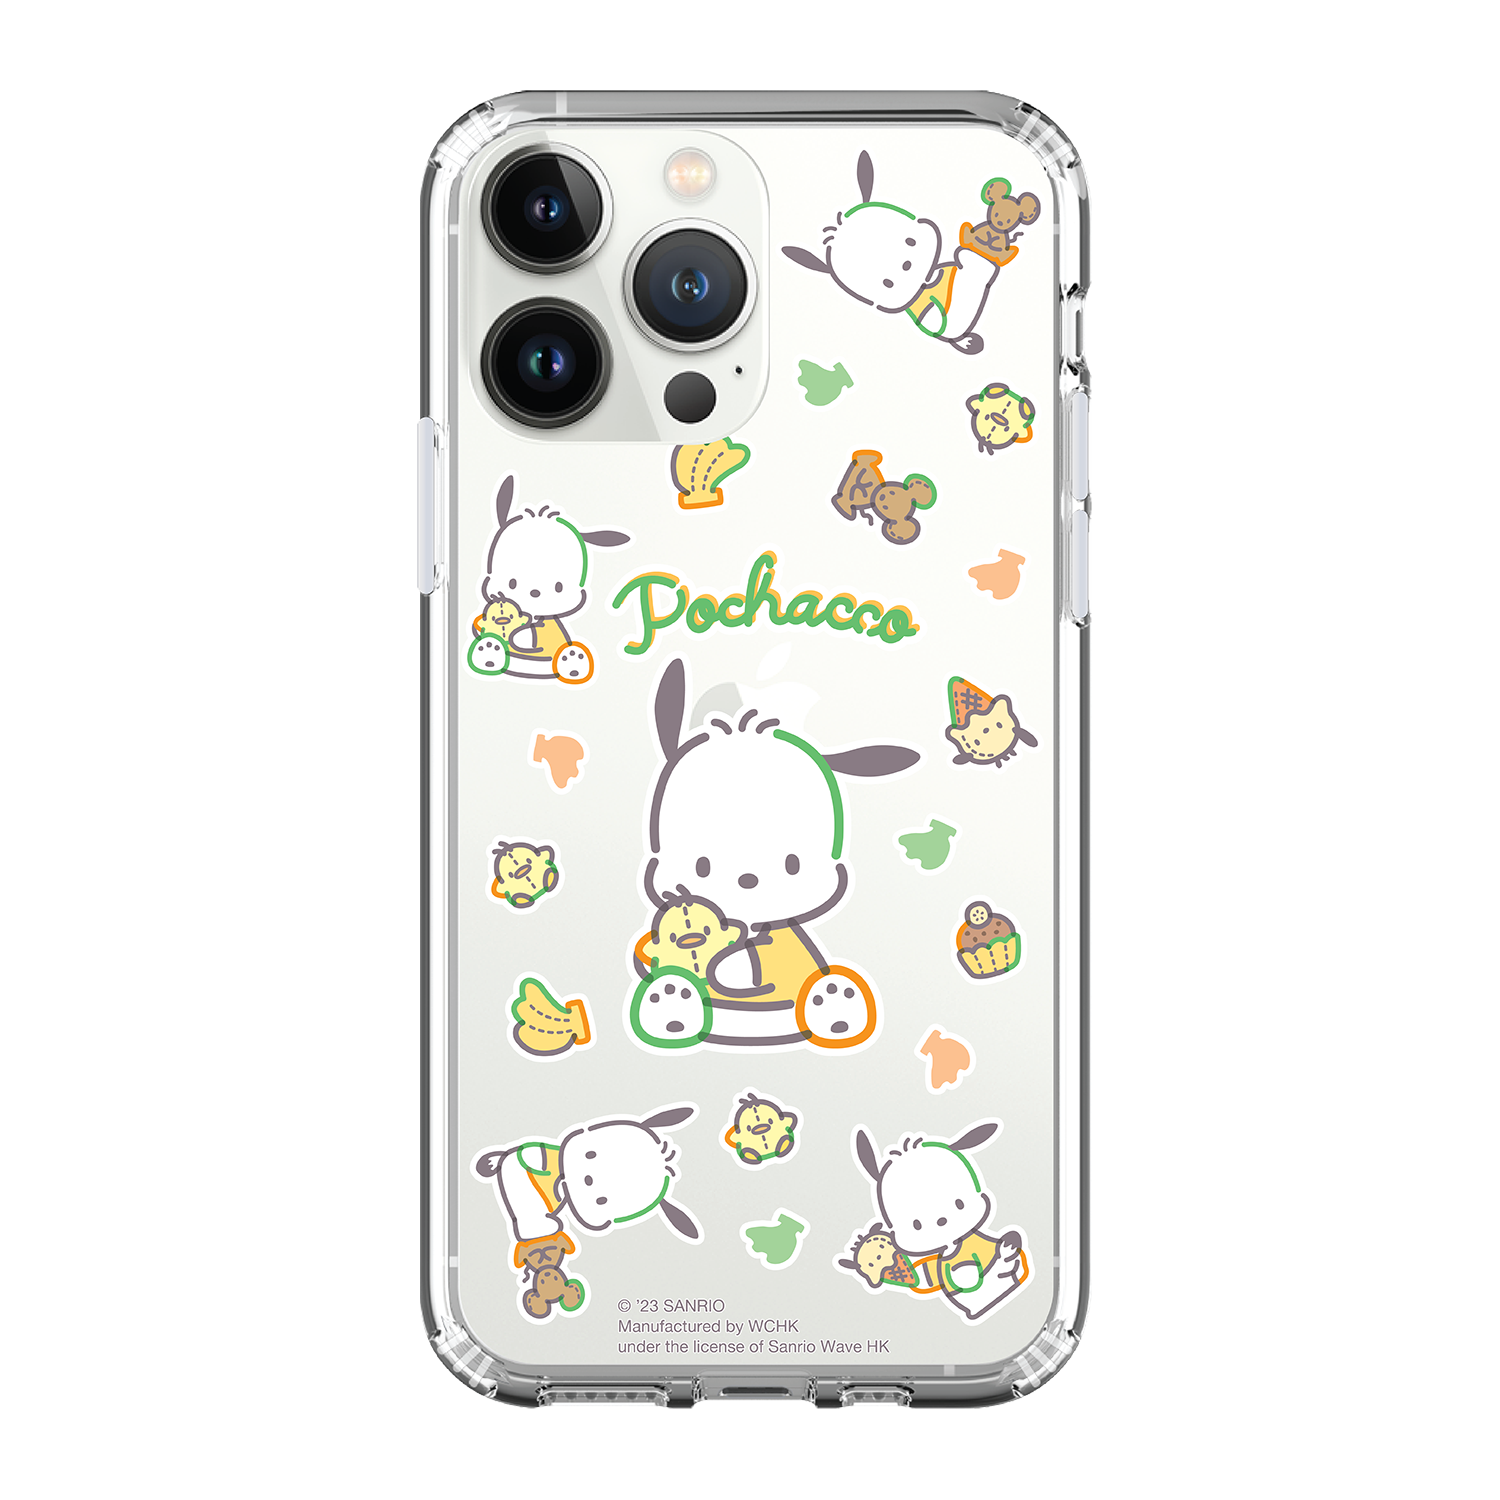 Pochacco Clear Case / iPhone Case / Android Case / Samsung Case 防撞透明手機殼 (PC122)